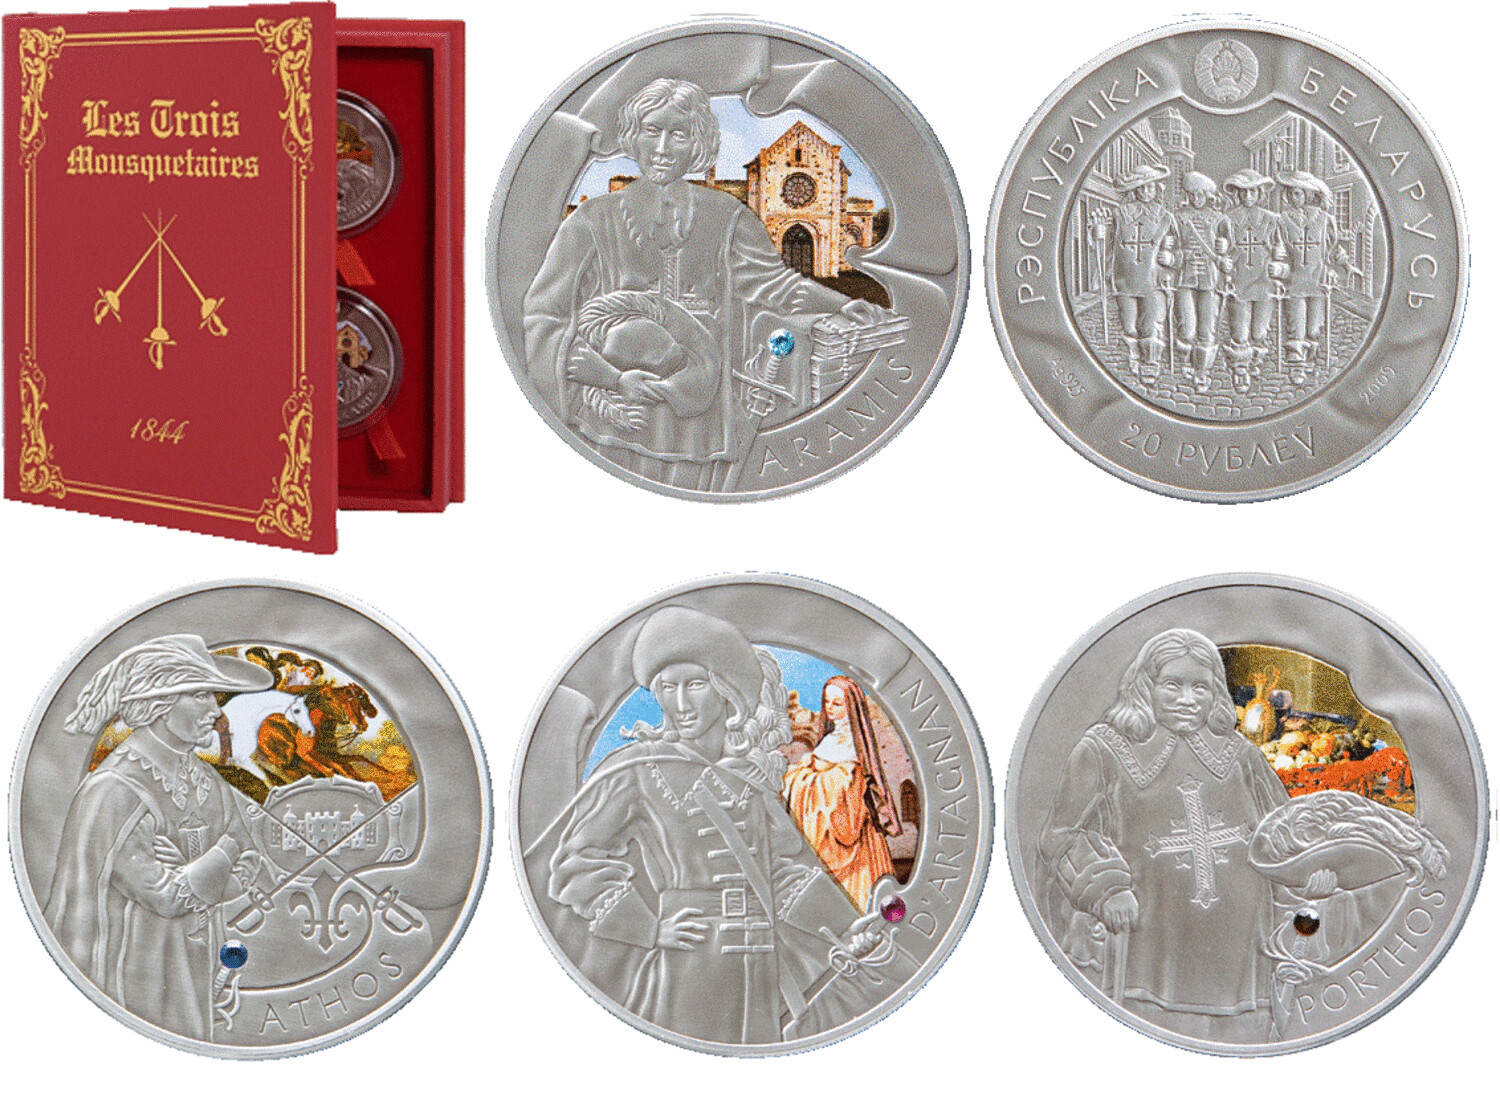 Belarus. 2009. A set of 4 coins of 20 Rubles. Three Musketeers. 0.925 Silver. 3.3645 Oz., ASW. 28.28 g × 4. BU / Colored. Mintage: 10,000